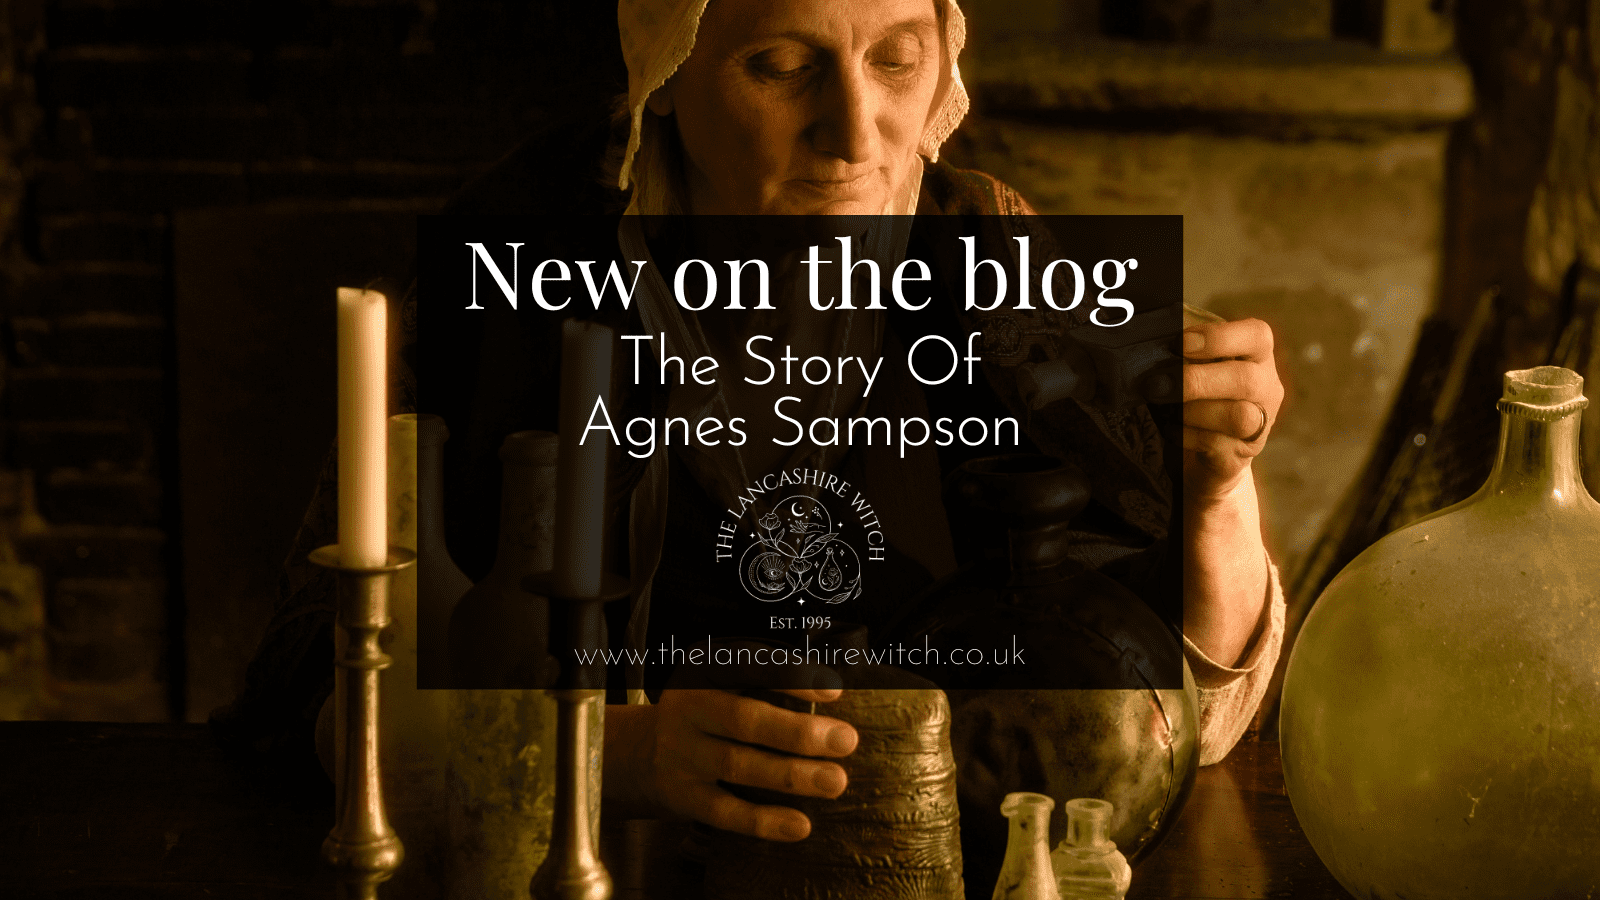 The Story of Agnes Sampson